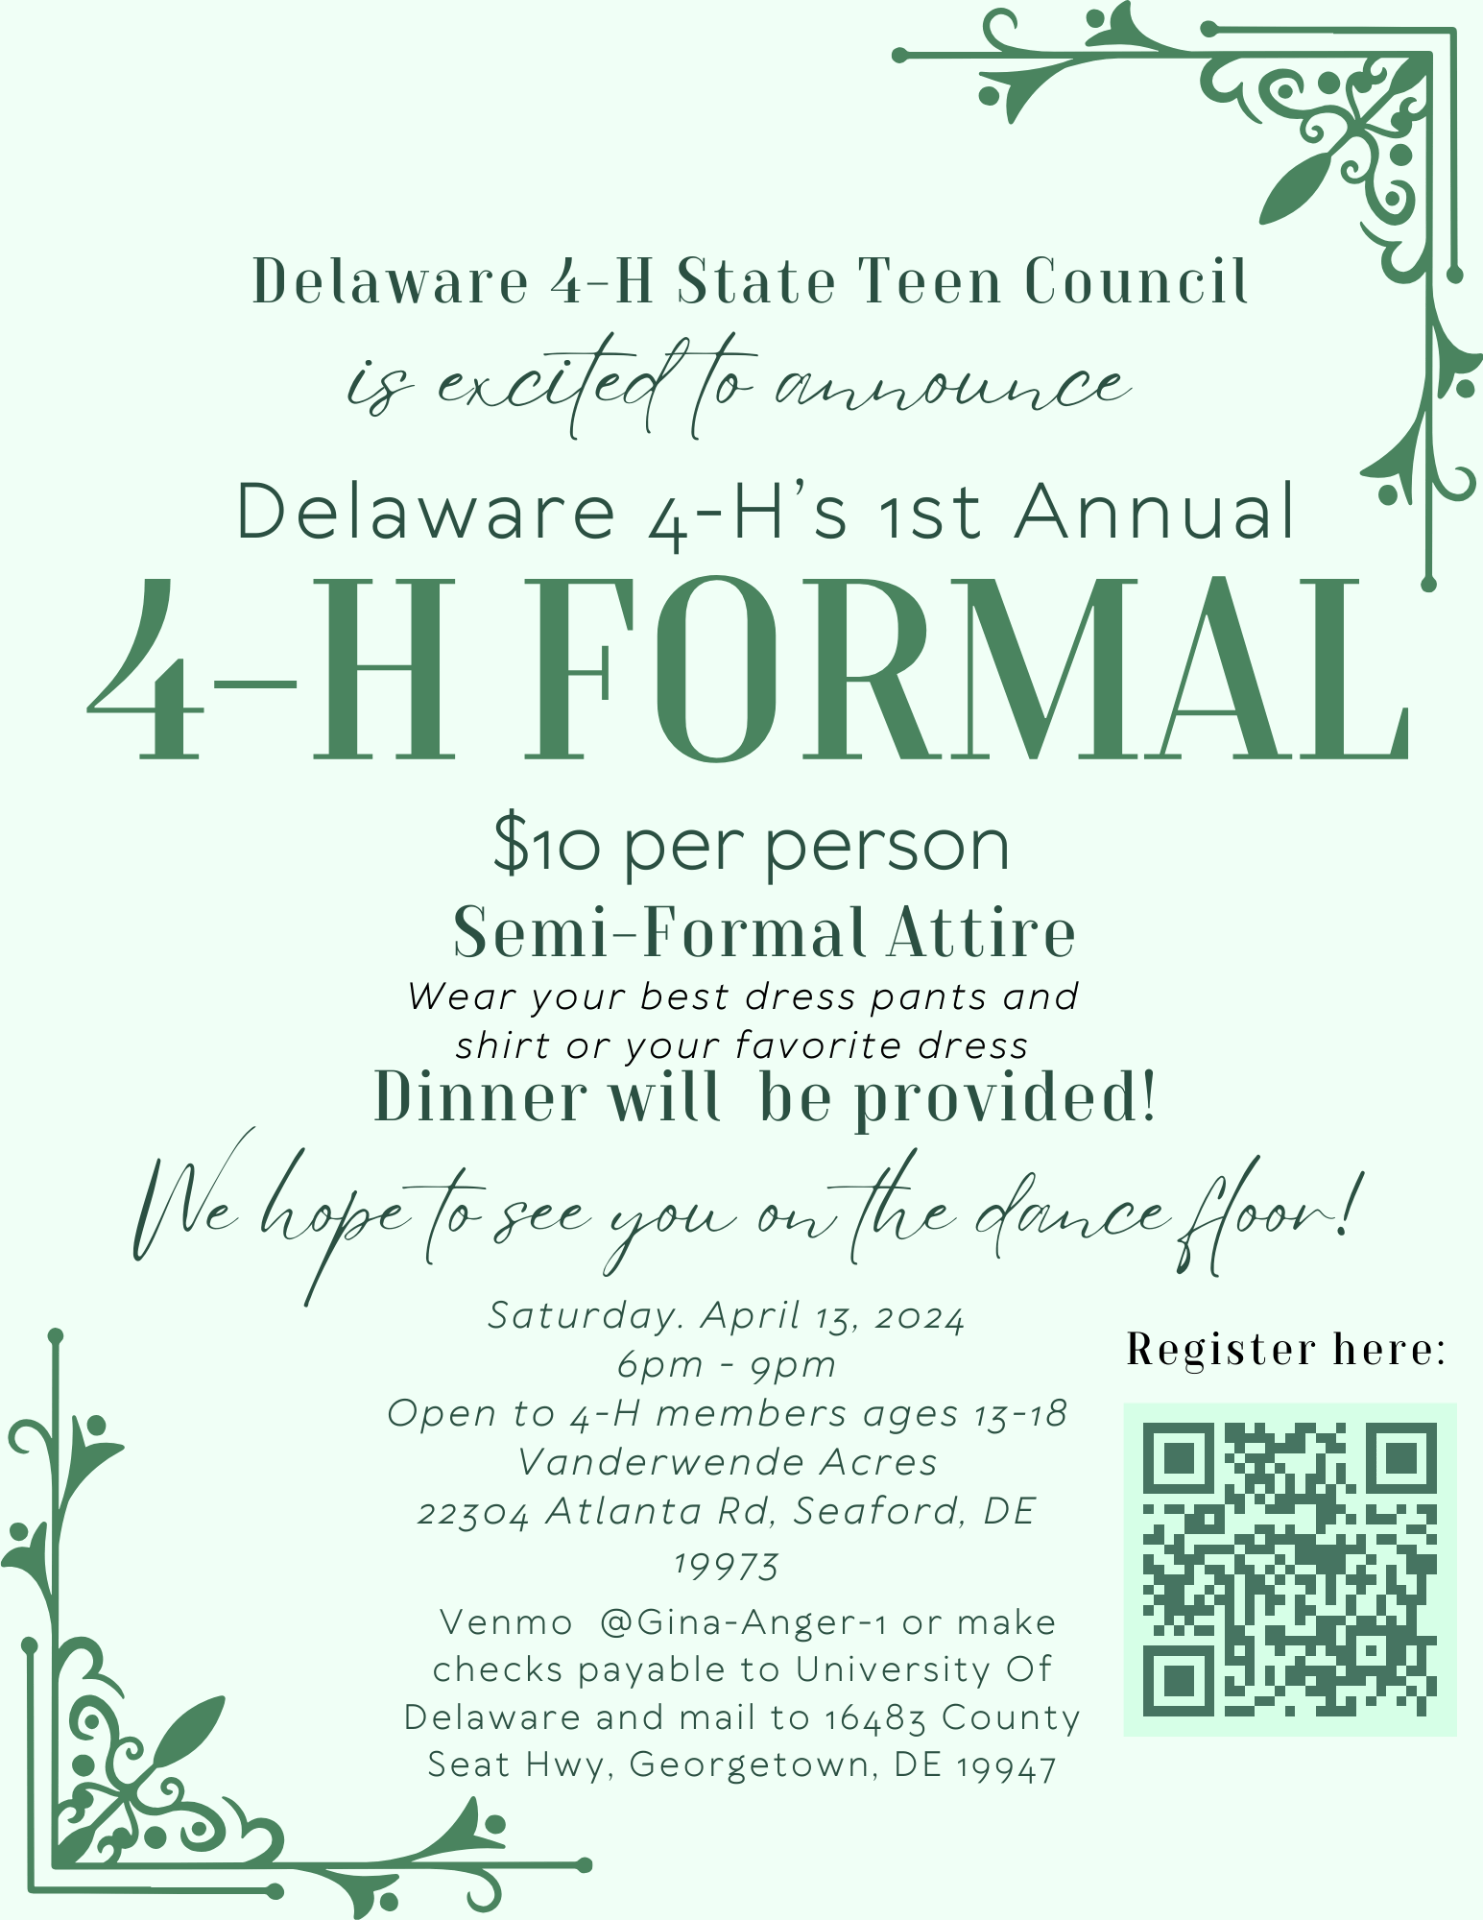 Delaware 4-H State Teen Council is excited to announce: Delaware 4-H's 1st Annual 4-H Formal. $10 per person. Semi-Formal Attire- wear your best dress pants and shirt or favorite dress. Dinner will be provided! We hope to see you on the dance floor! Saturday, April 13, 2024. 6:00-9:00 PM.Open to 4-H members ages 13-18. Vanderwende Acres, 22304 Atlanta Road, Seaford, DE 19973. Venmo @Gina-Anger-1 or make checks payable to University of Delaware and mail to 16483 County Seat Hwy, Georgetown, DE 19947